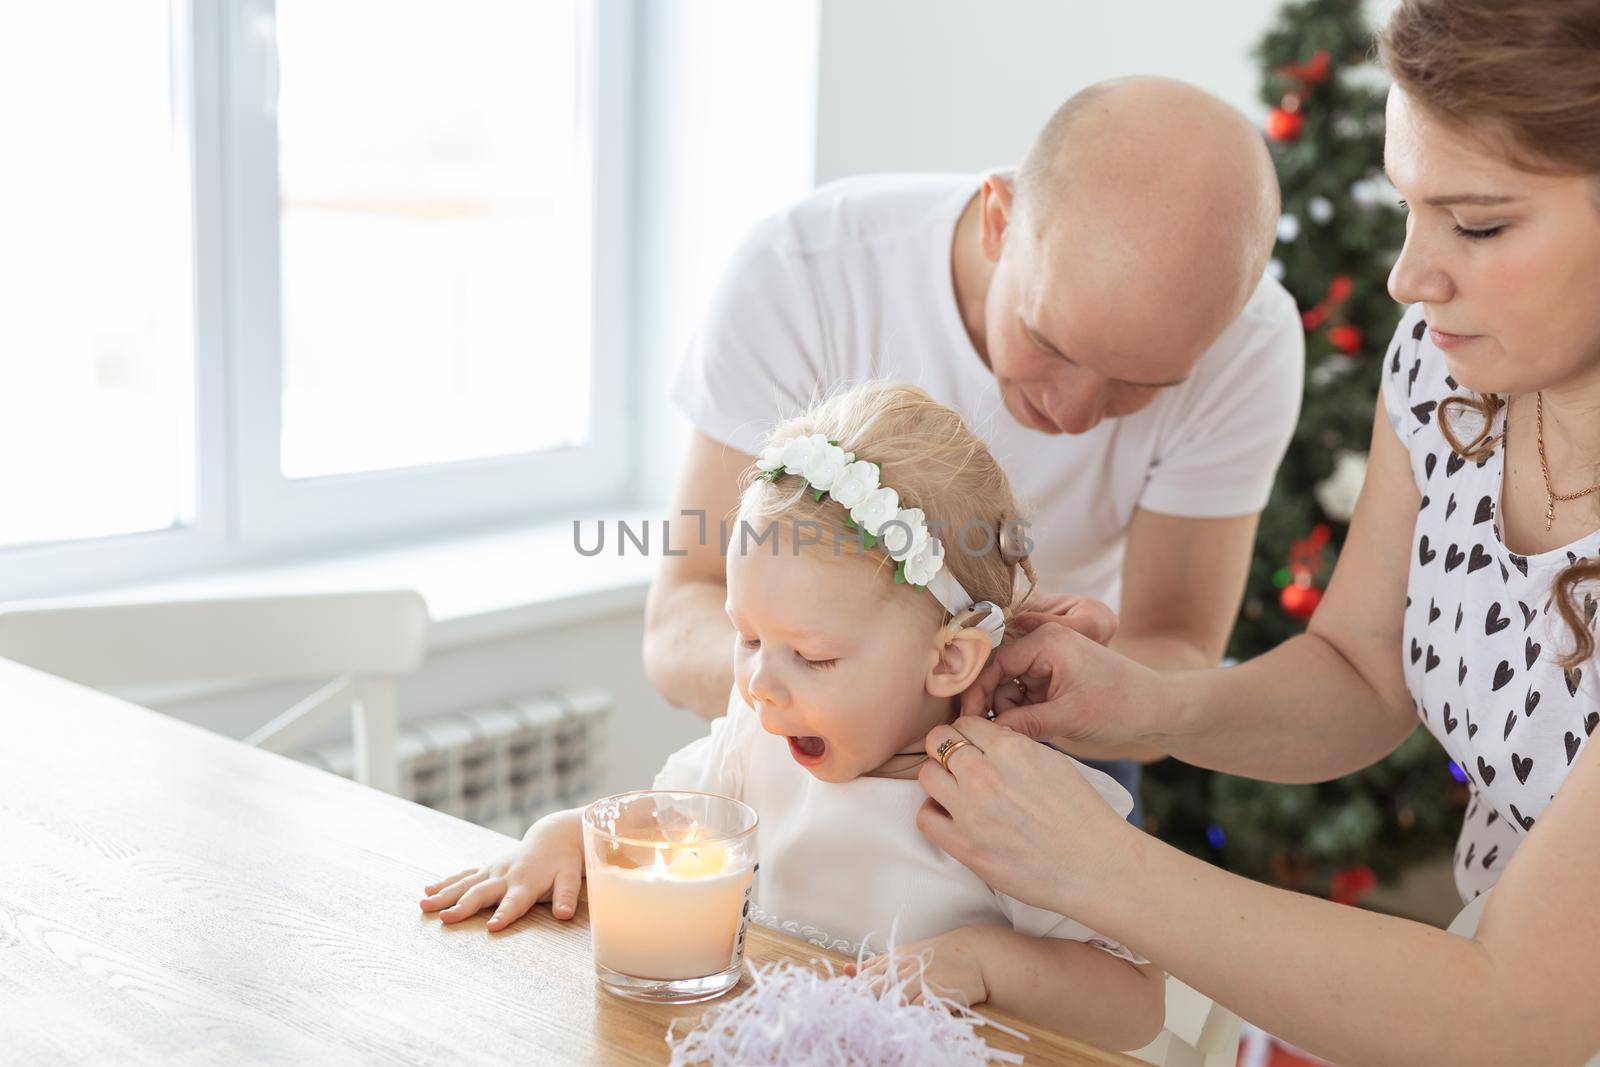 Mother and father helps to put on cochlear implant for their deaf baby daughter in christmas living room copy space. Hearing aid and diversity and innovating medical technologies treatment deafness concept by Satura86